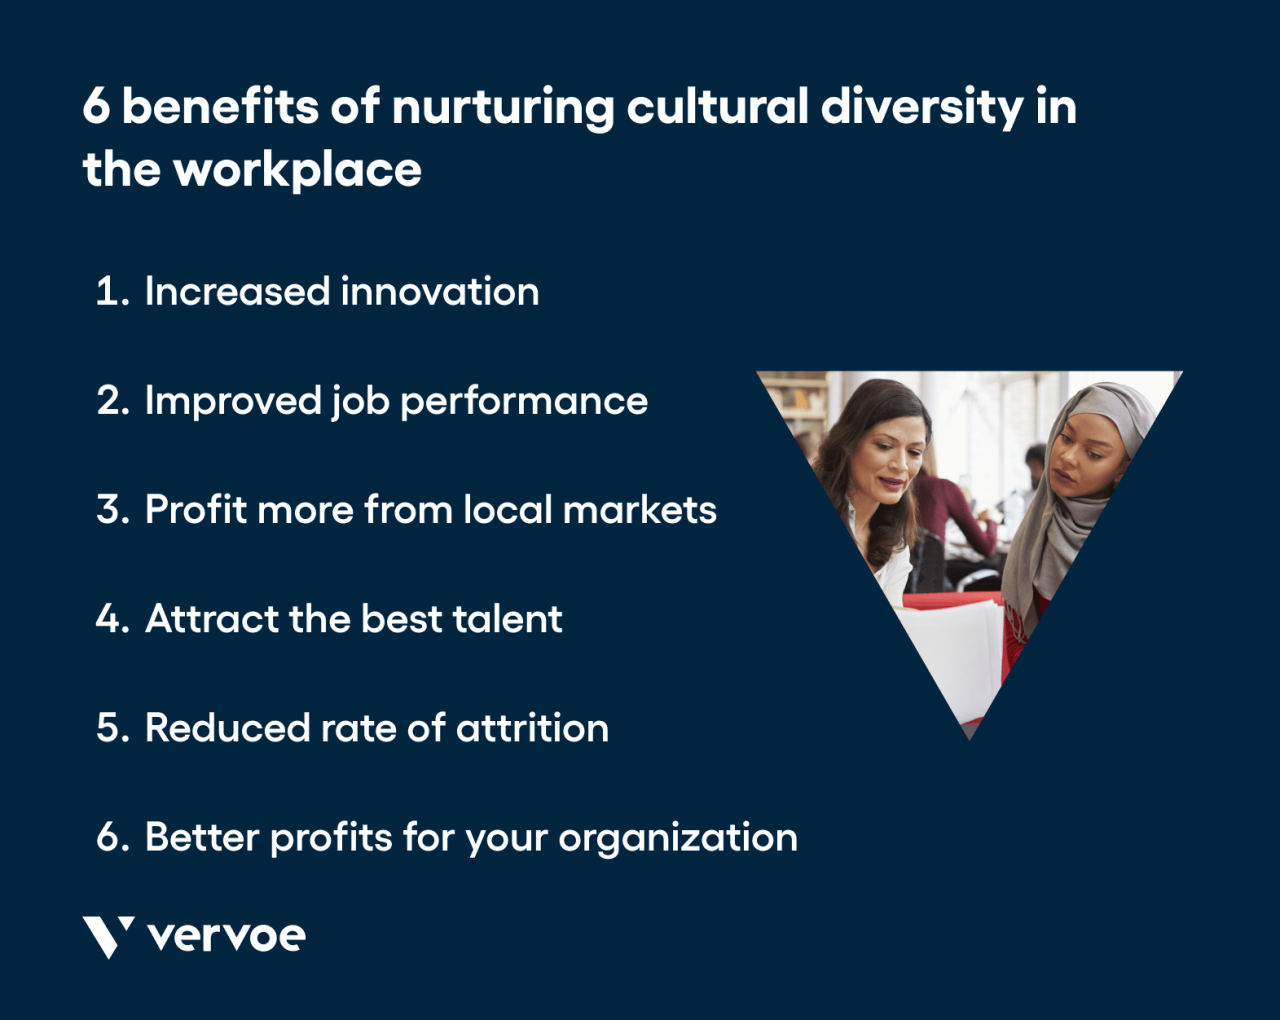 Diversity cultural diverse infographic slogans workplace taglines good inclusion benefits team business equality racial poster unifying members list multicultural program